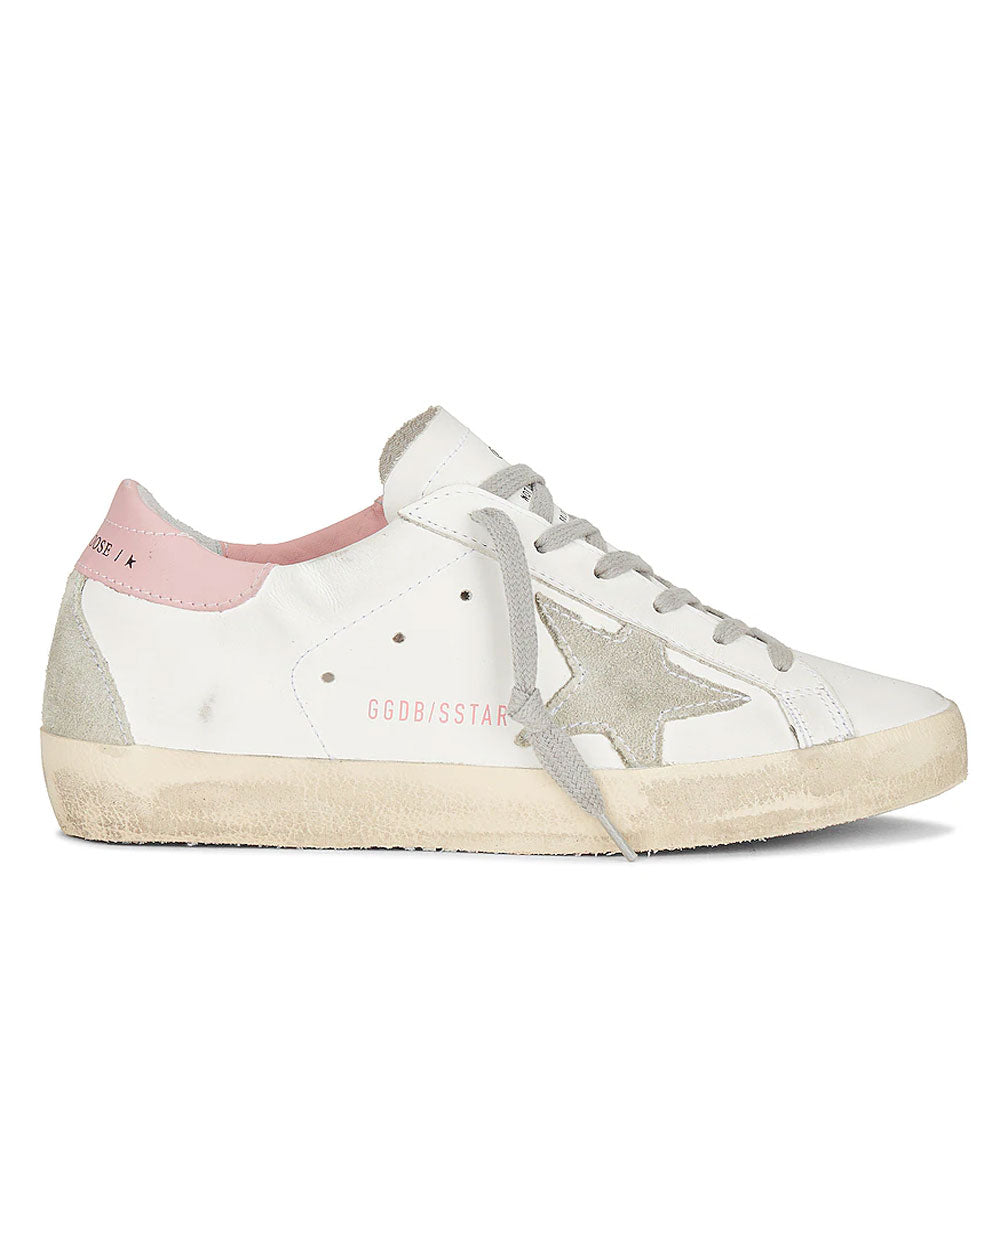 Super-Star Low Top Sneaker in White Ice and Pink